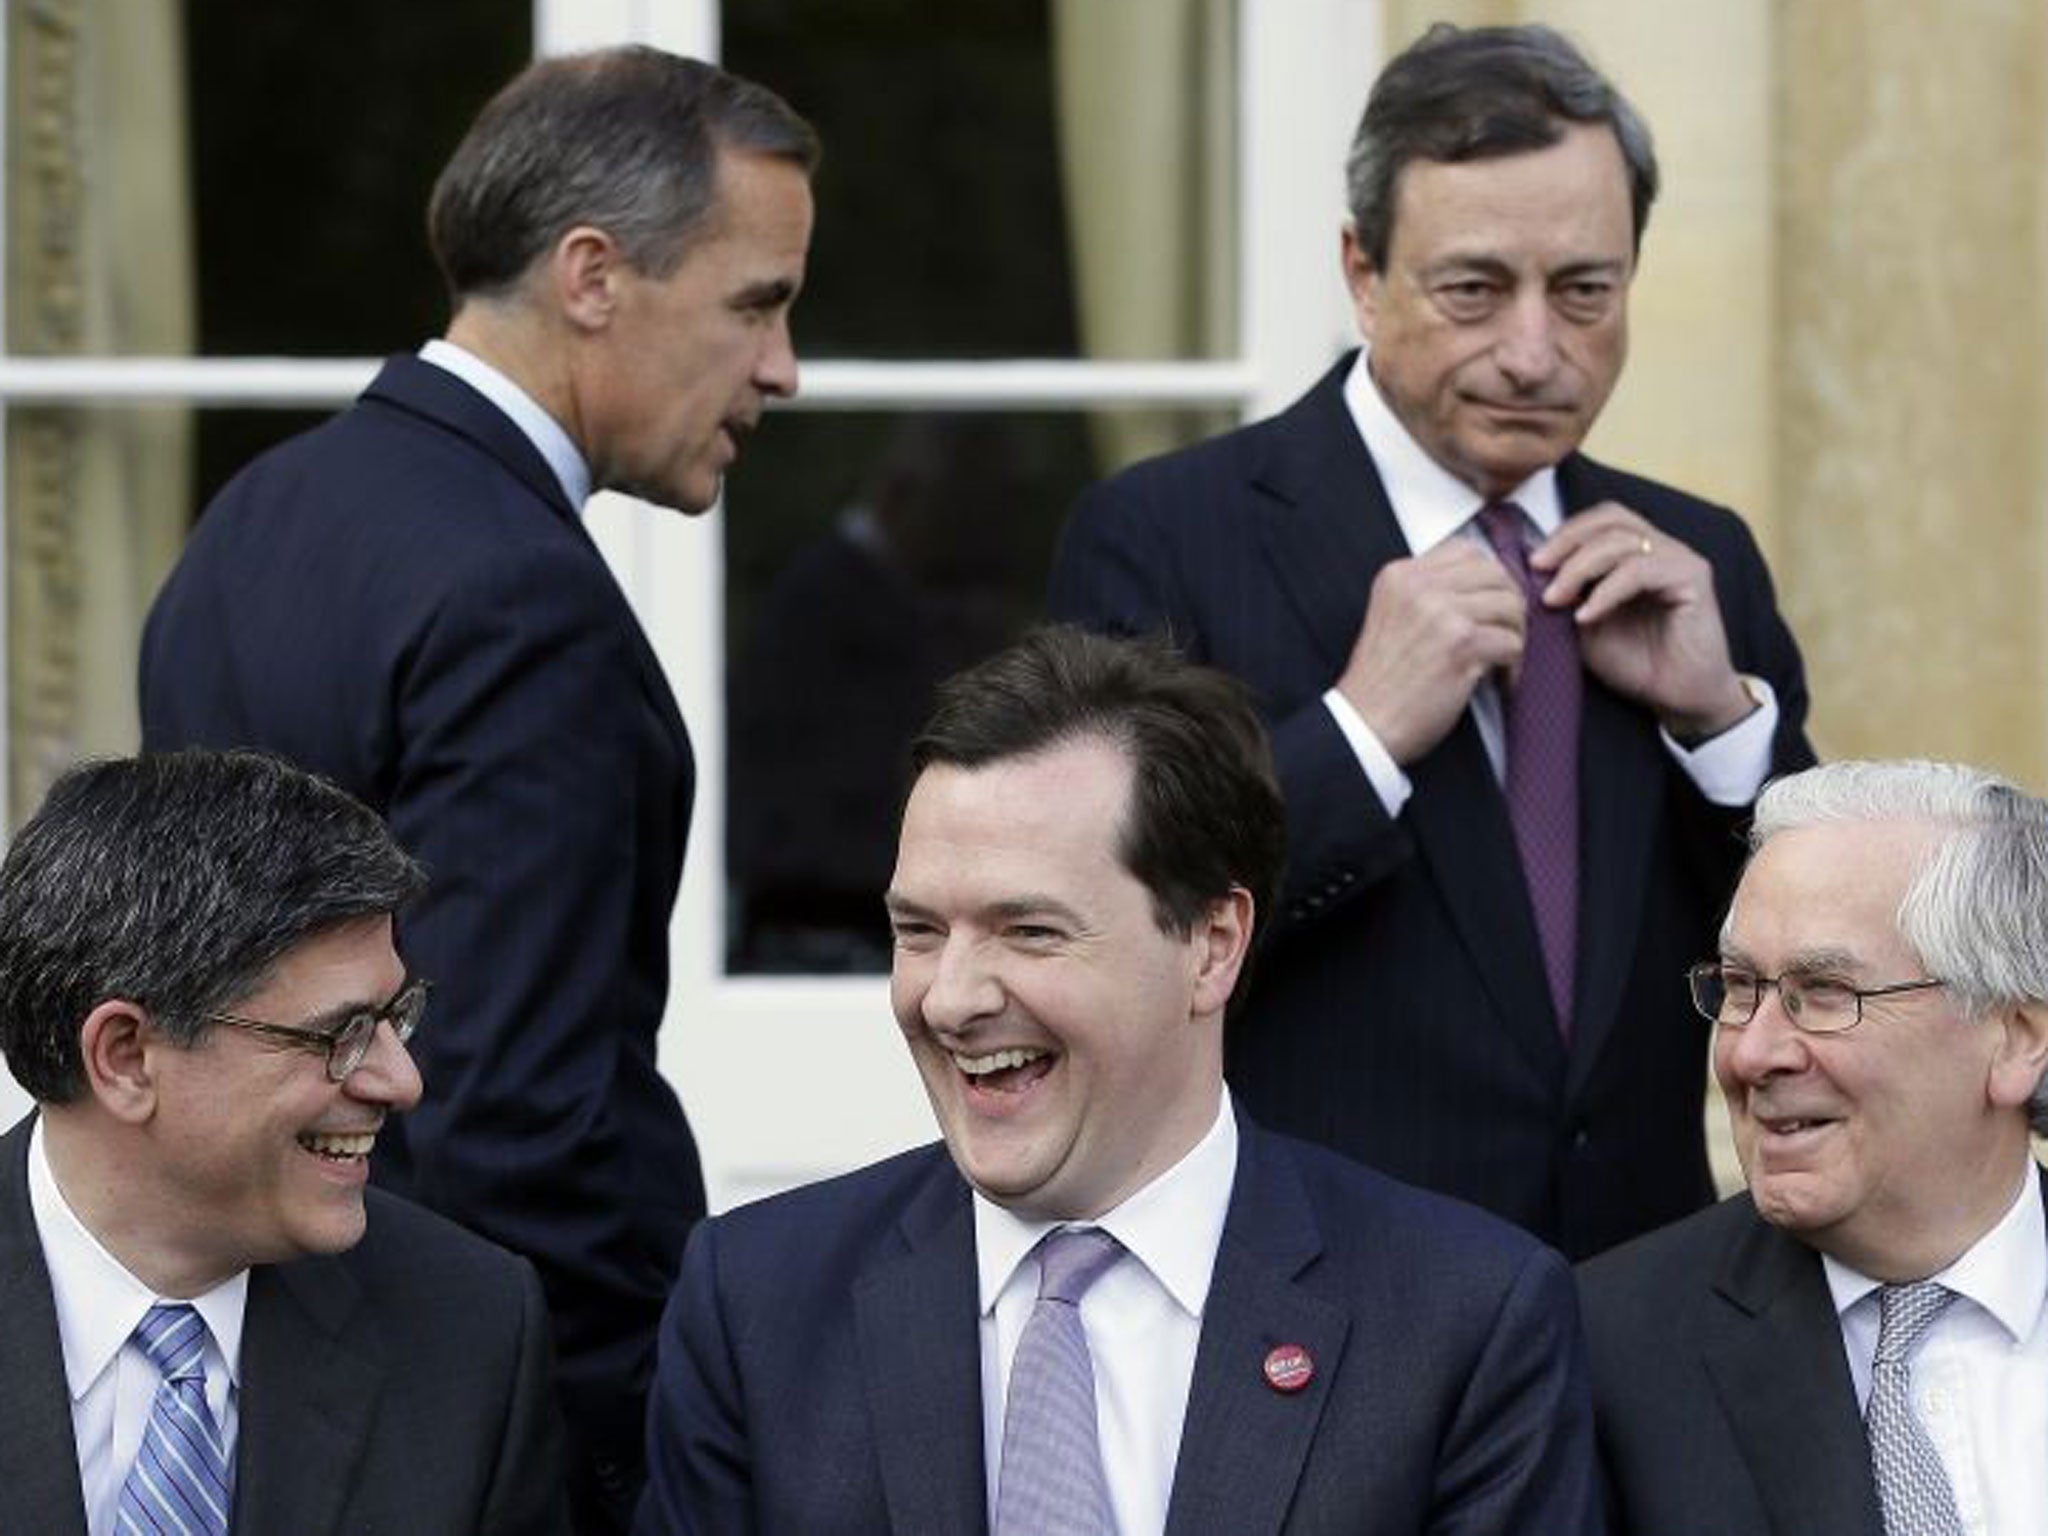 George Osborne (centre) with global financial policymakers at the G7 meeting in Aylesbury